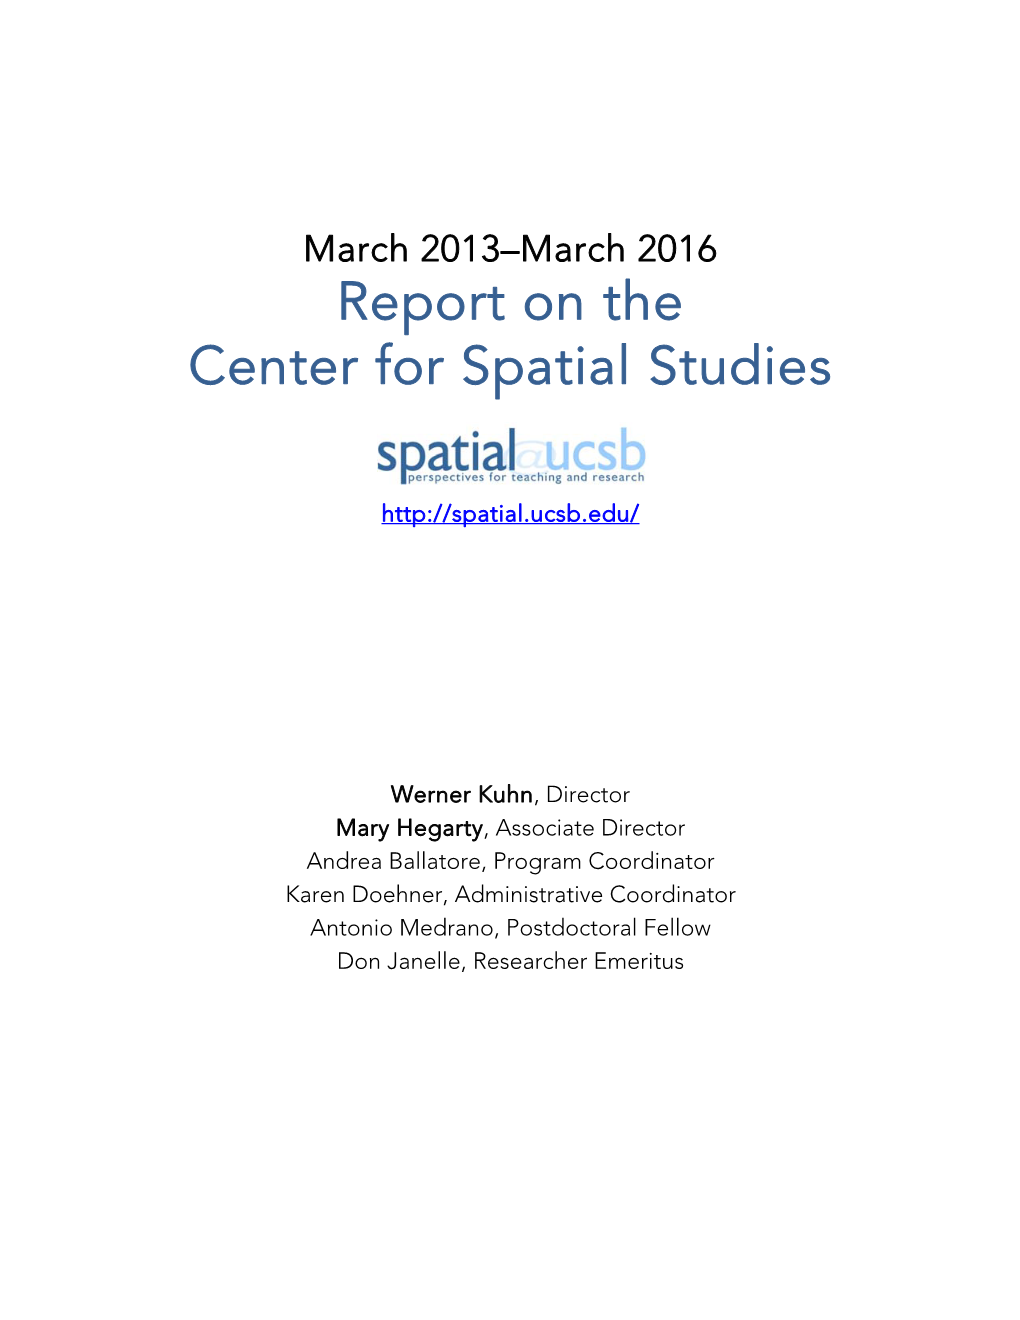 Report on the Center for Spatial Studies